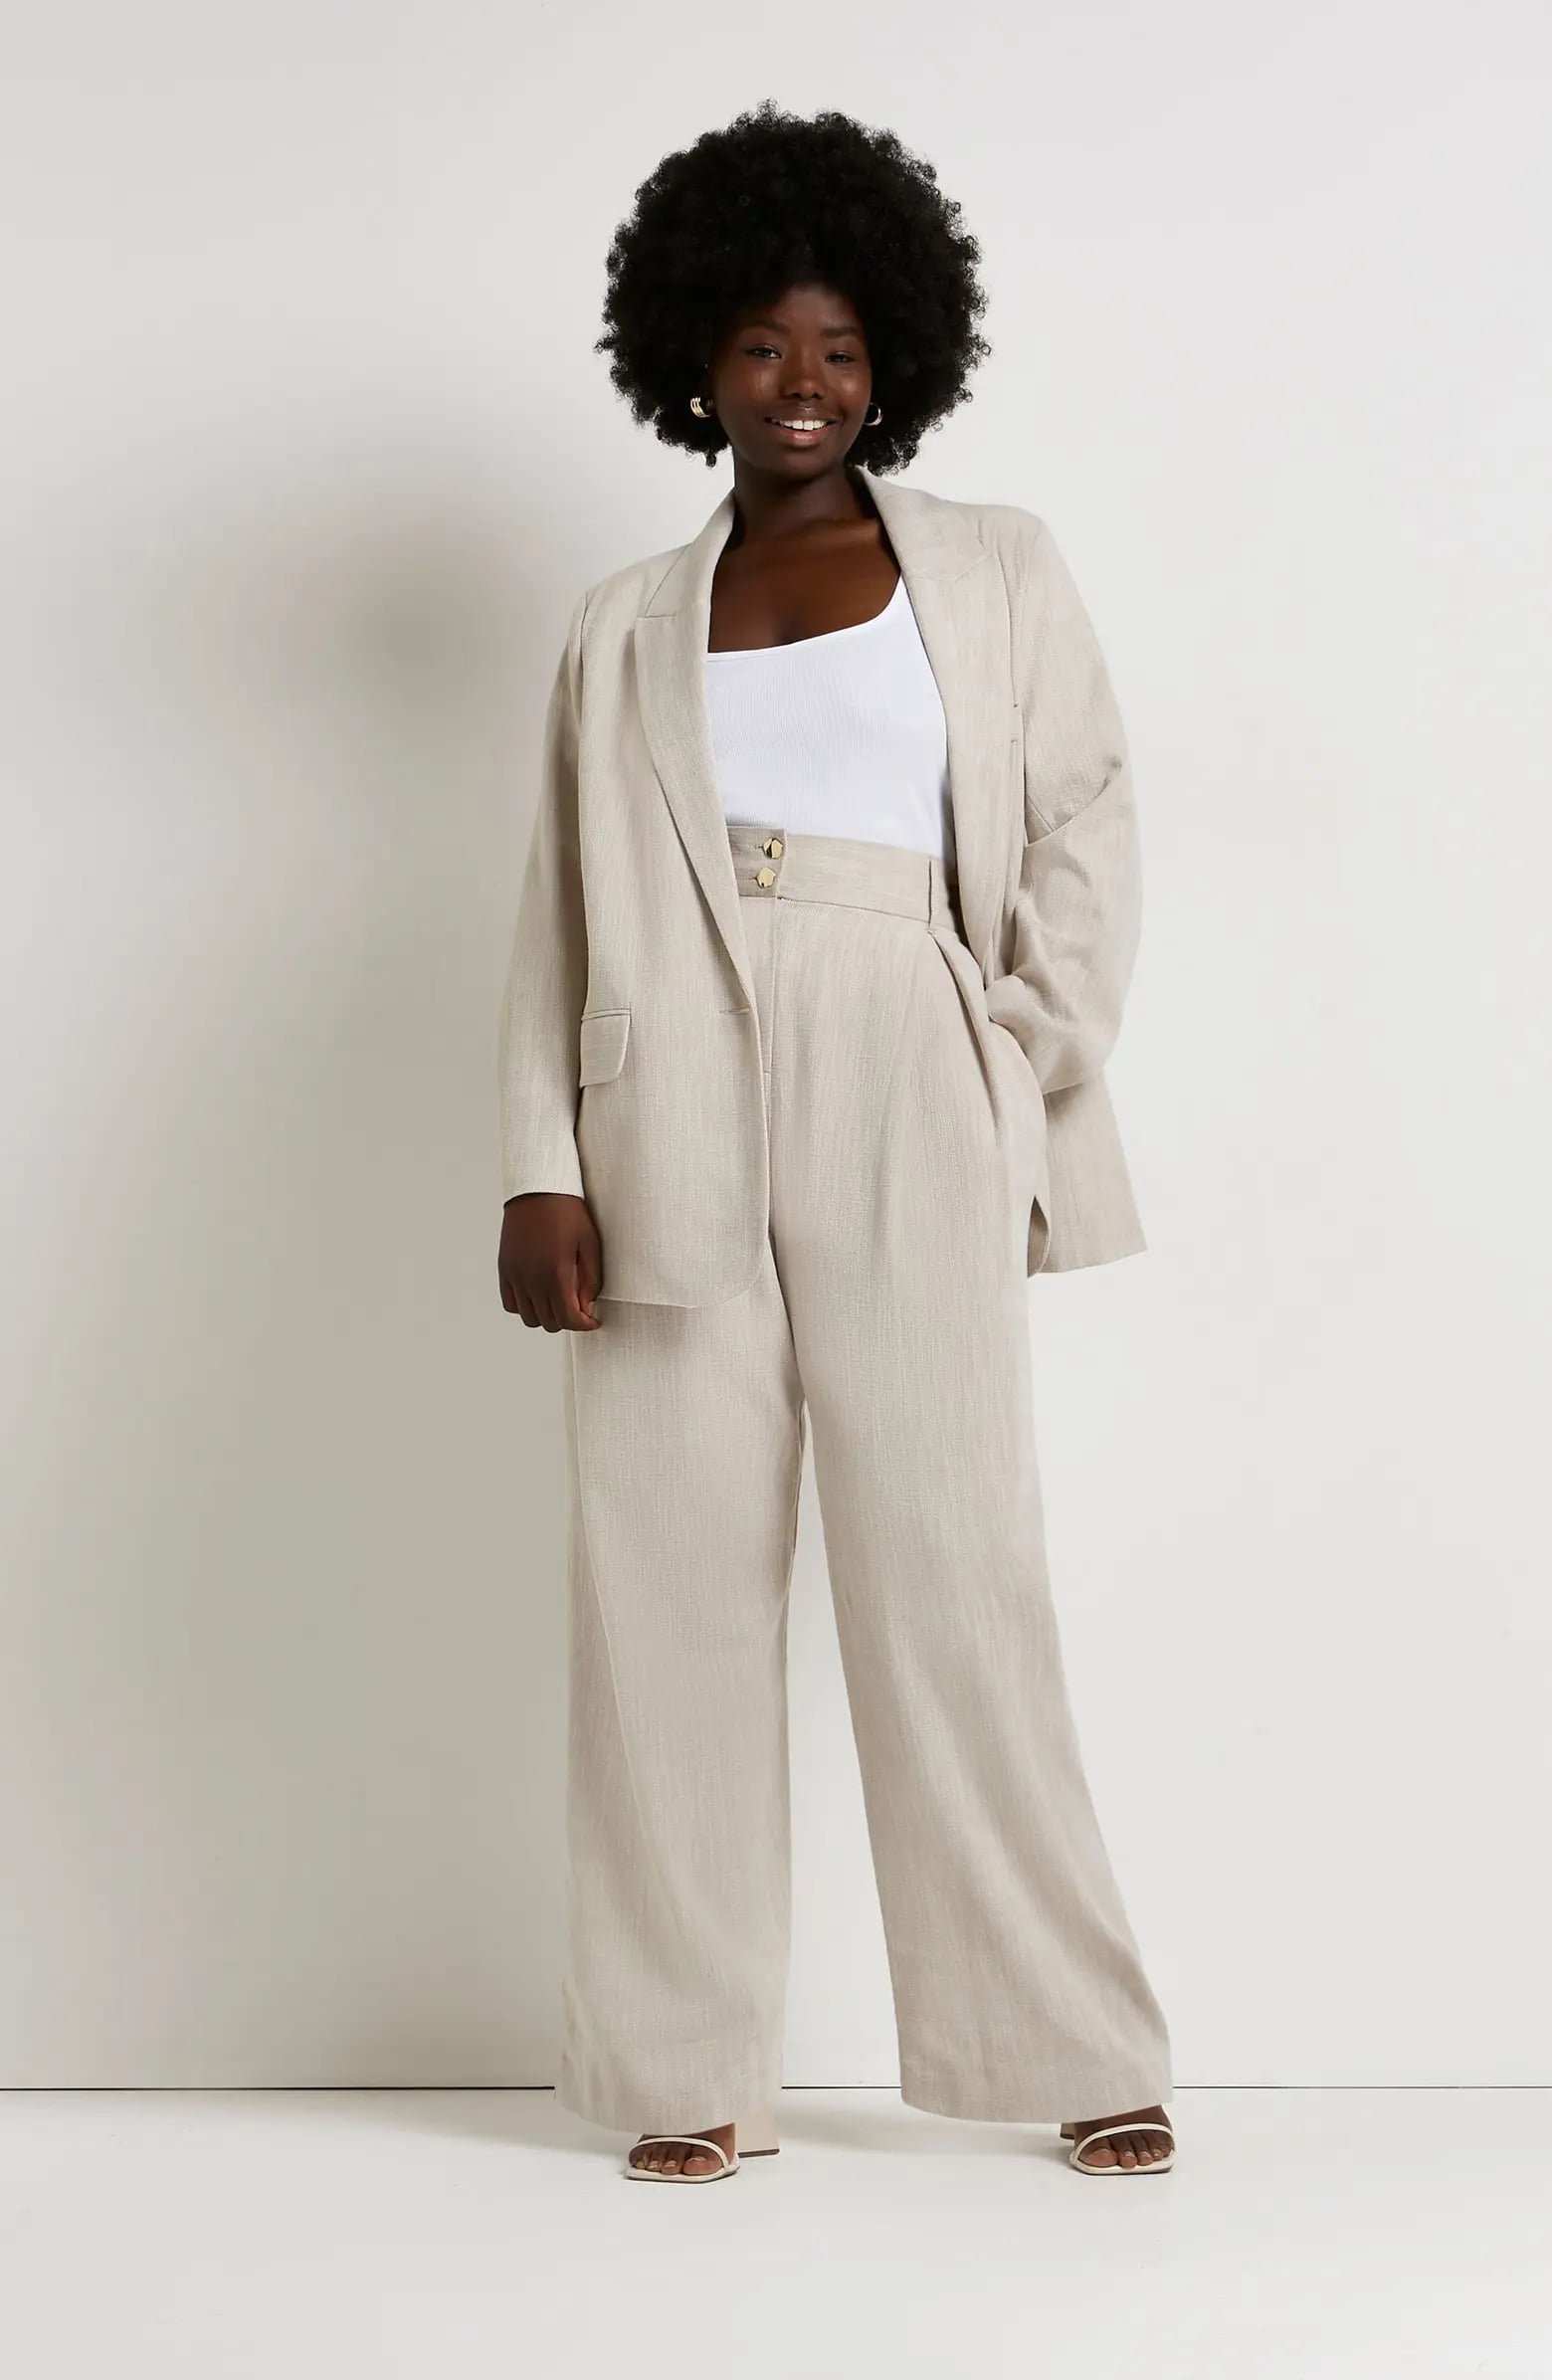 Business Casual Target: The Essentials for Women's Workwear in